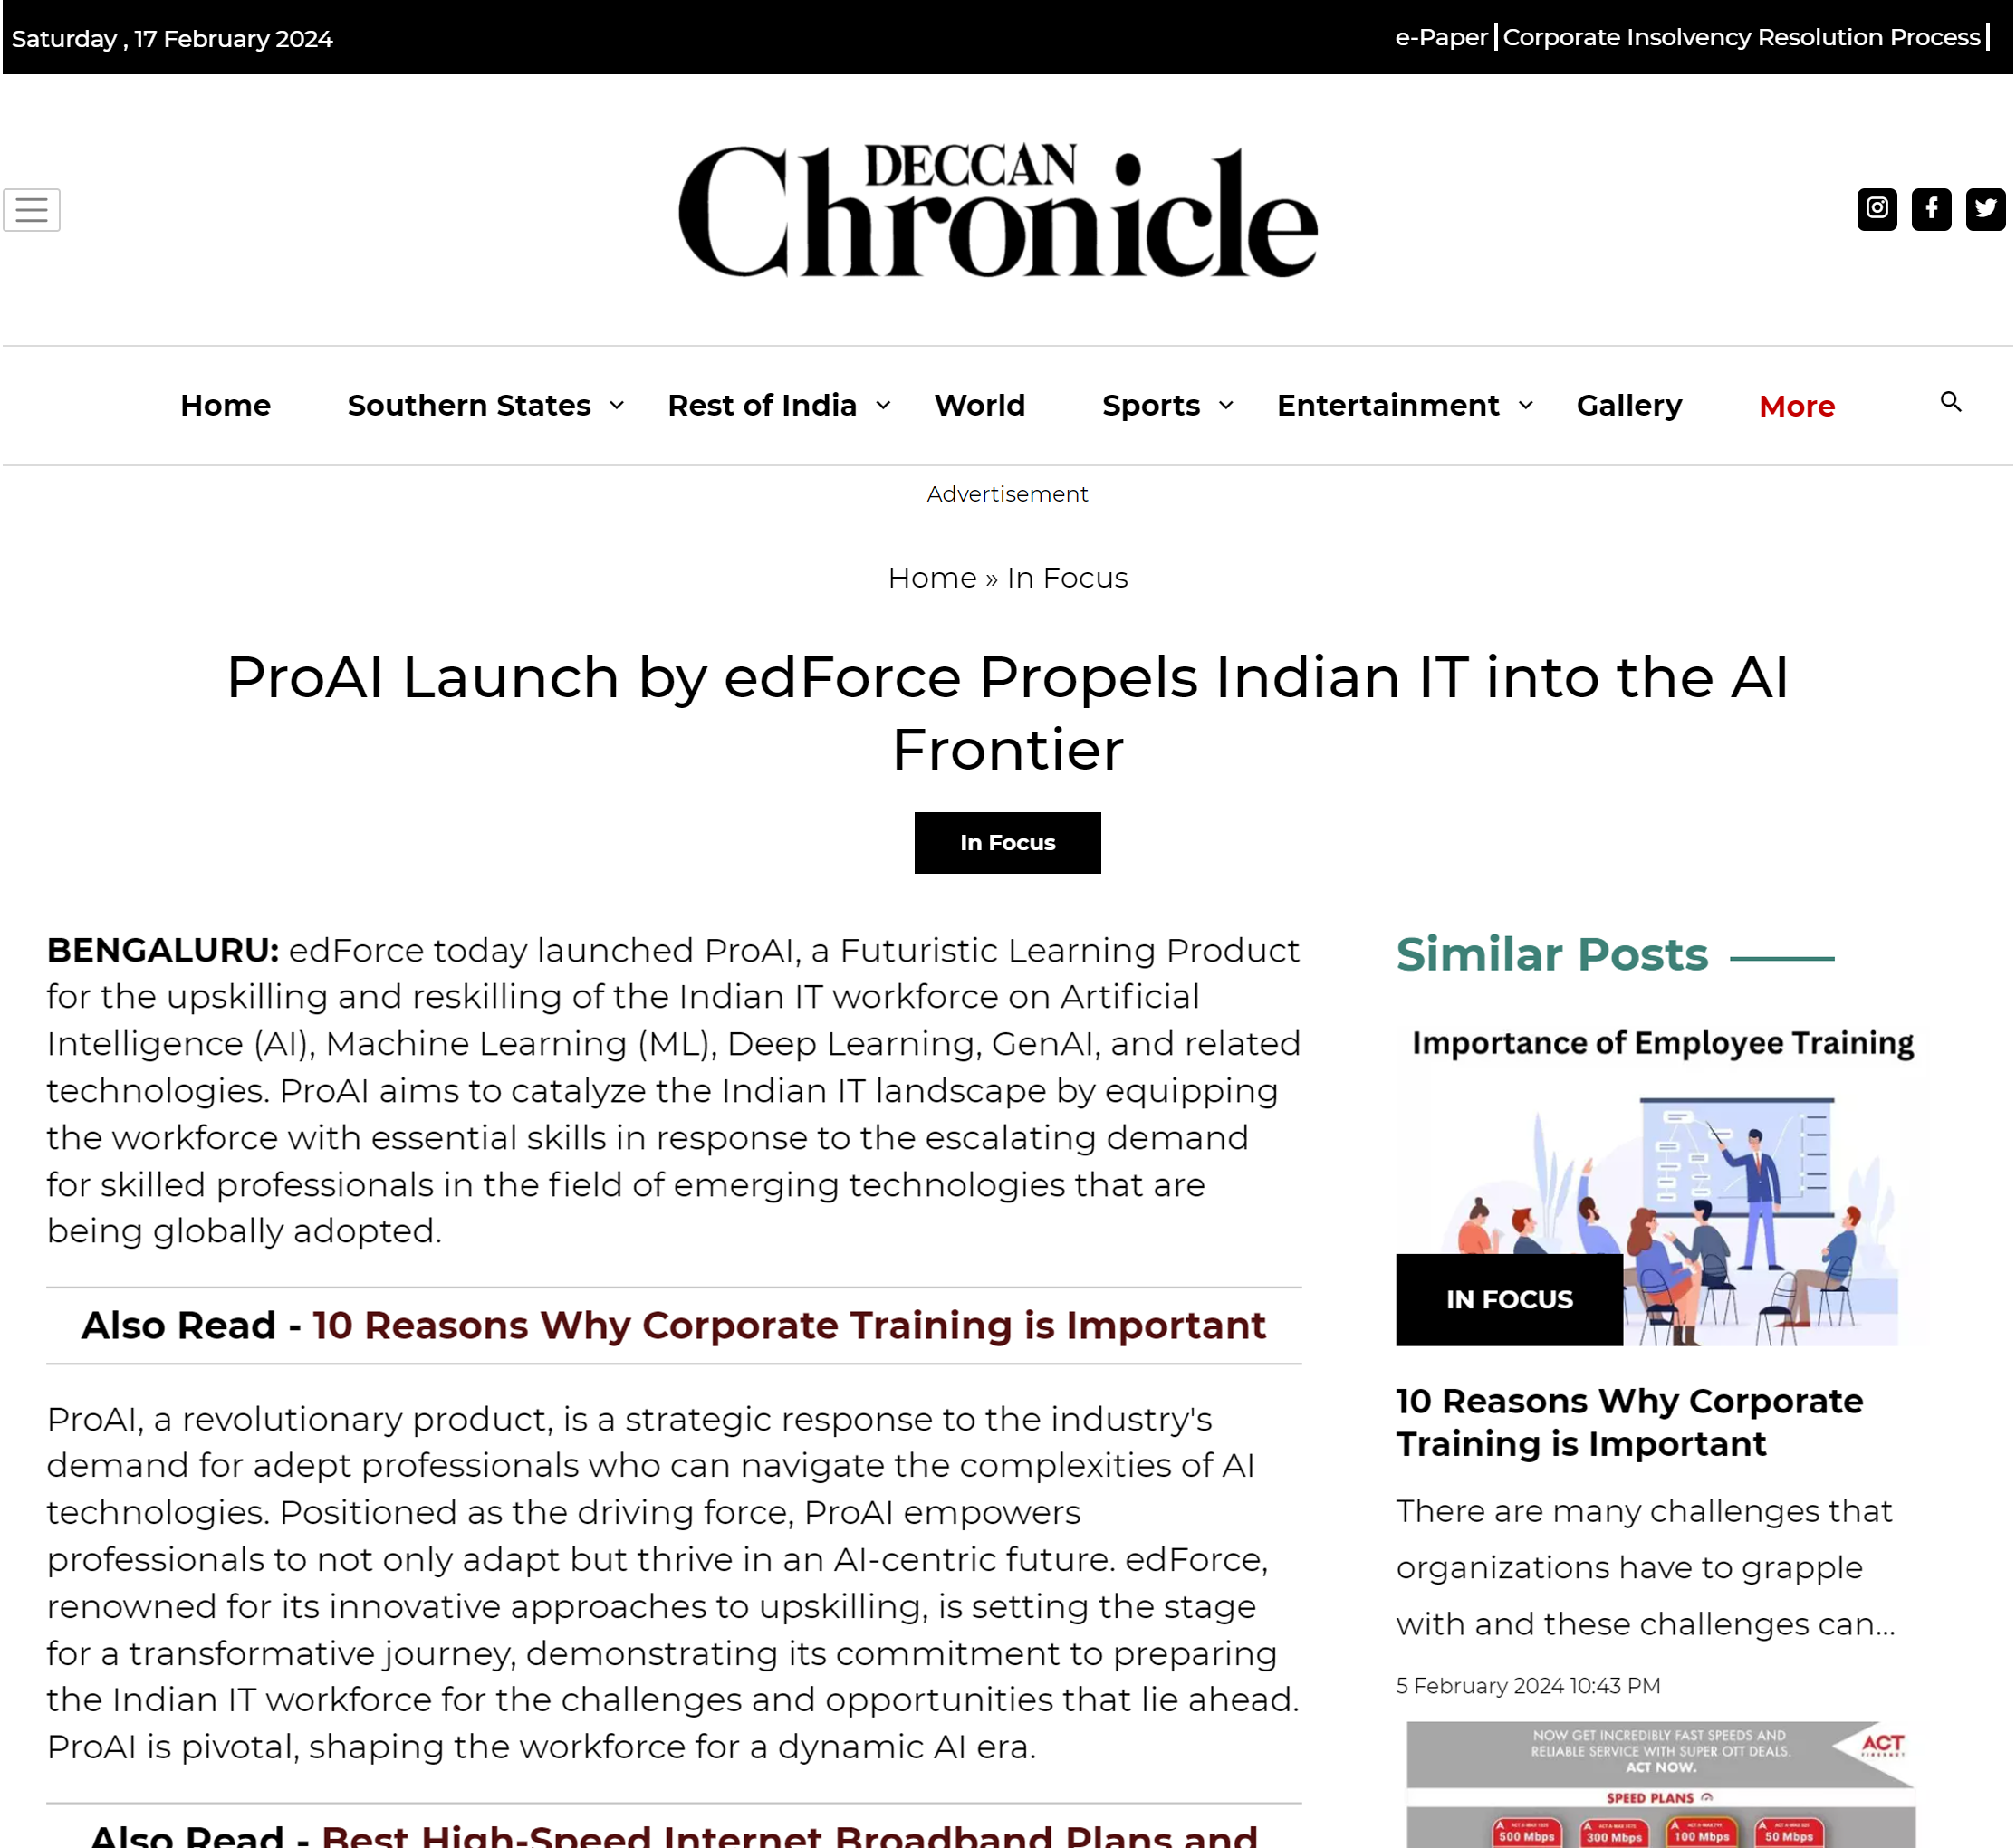 Ravi Kaklasaria edForce CEO ProAI Launch by edForce Propels Indian IT into the AI Frontier news covered by Deccan Chronicle